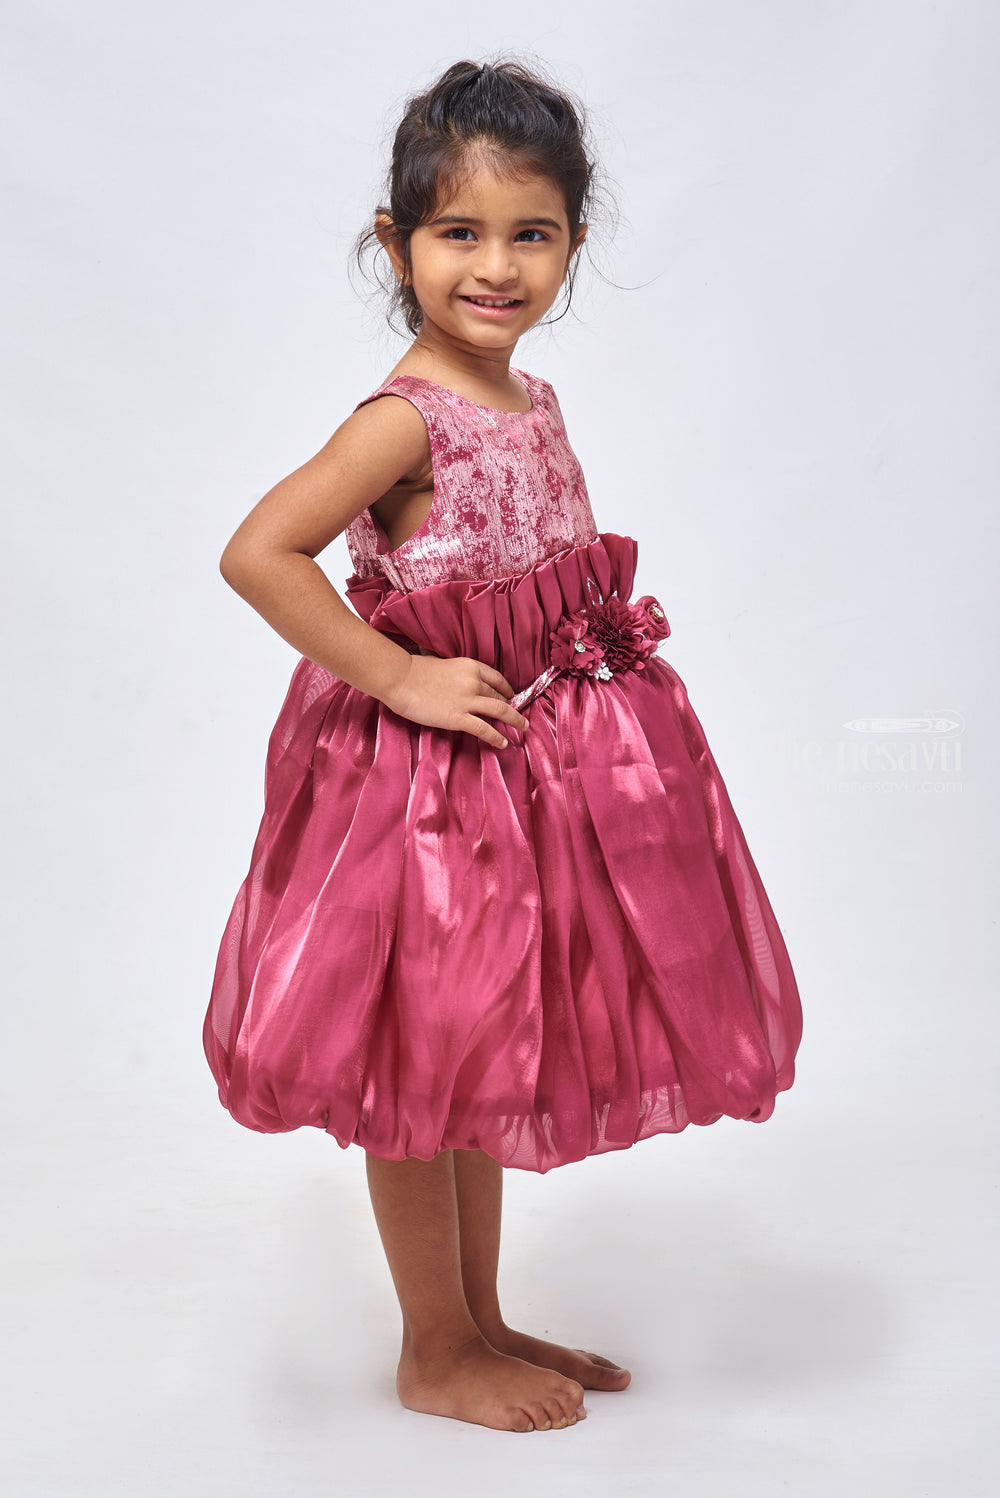 The Nesavu Girls Fancy Party Frock Ruby Radiance: Designer Foil-Printed Pleated Frock with Floral Applique in Organza Nesavu Mermaid Birthday Outfits: Trendy & Stylish Floral Embellished Baby Girl Frocks | The Nesavu